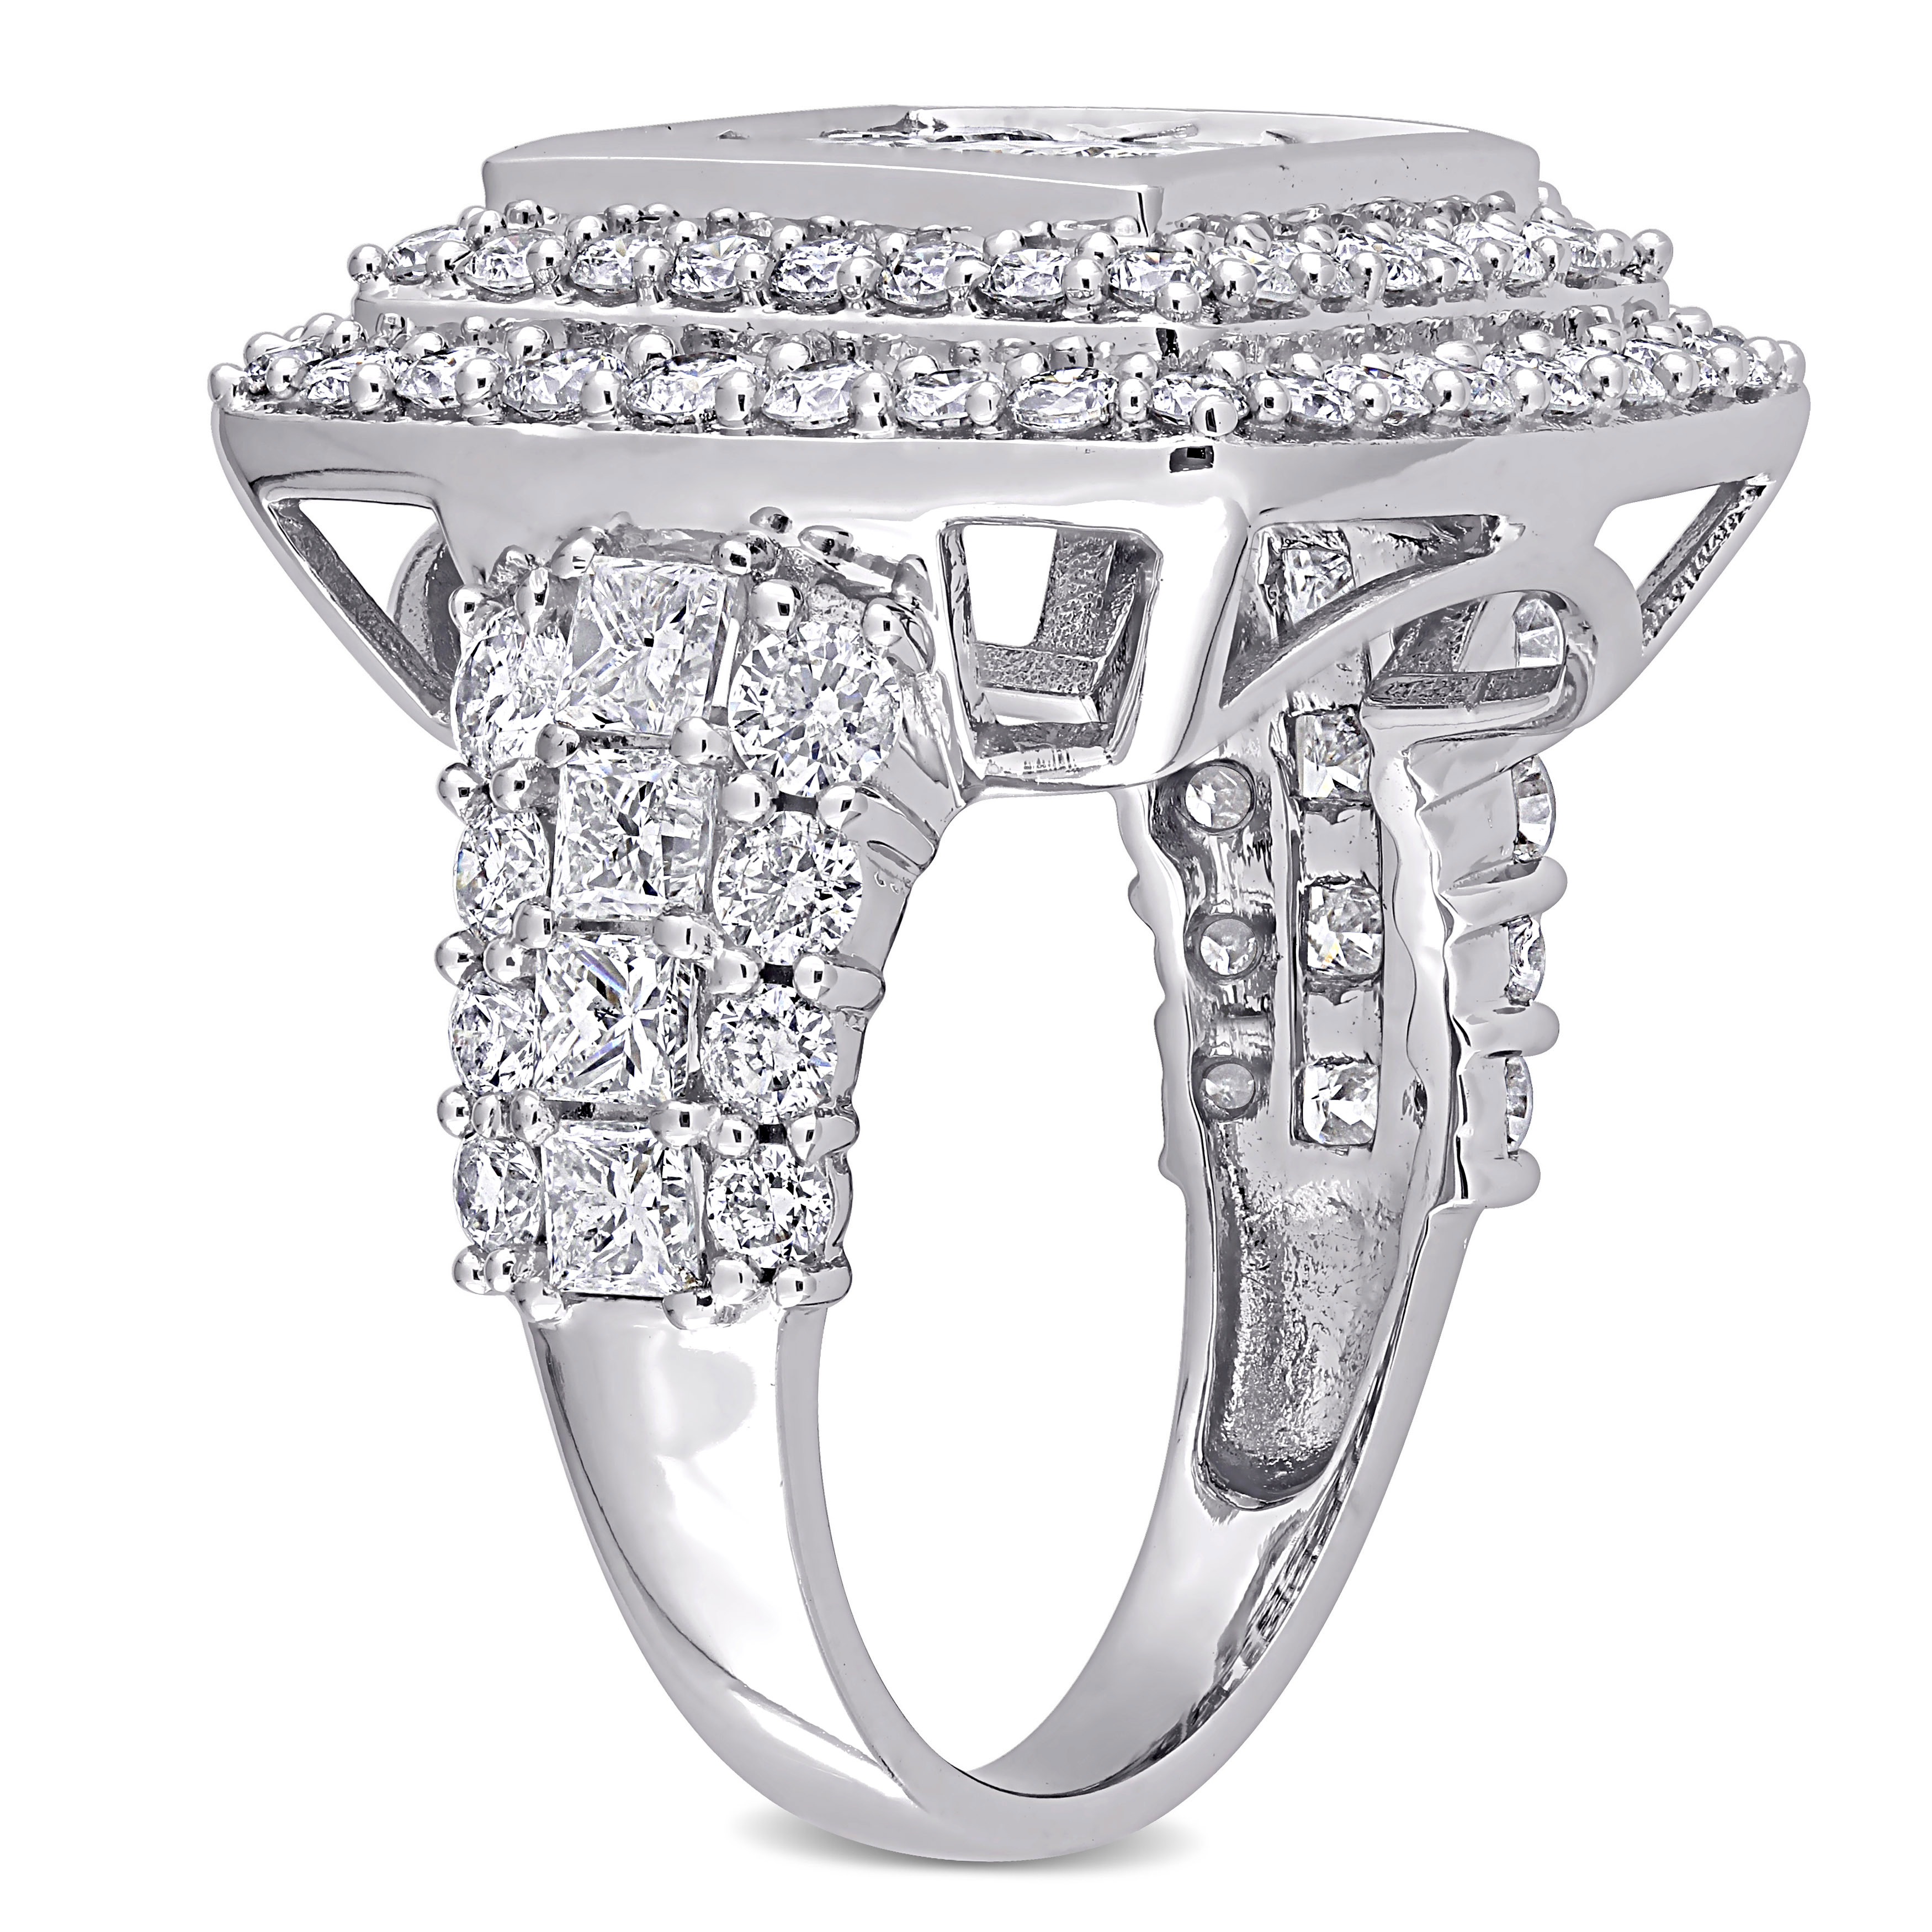 5 CT TW Princess and Round Diamond Double Halo Engagement Ring in 14k White  Gold - CBG000056